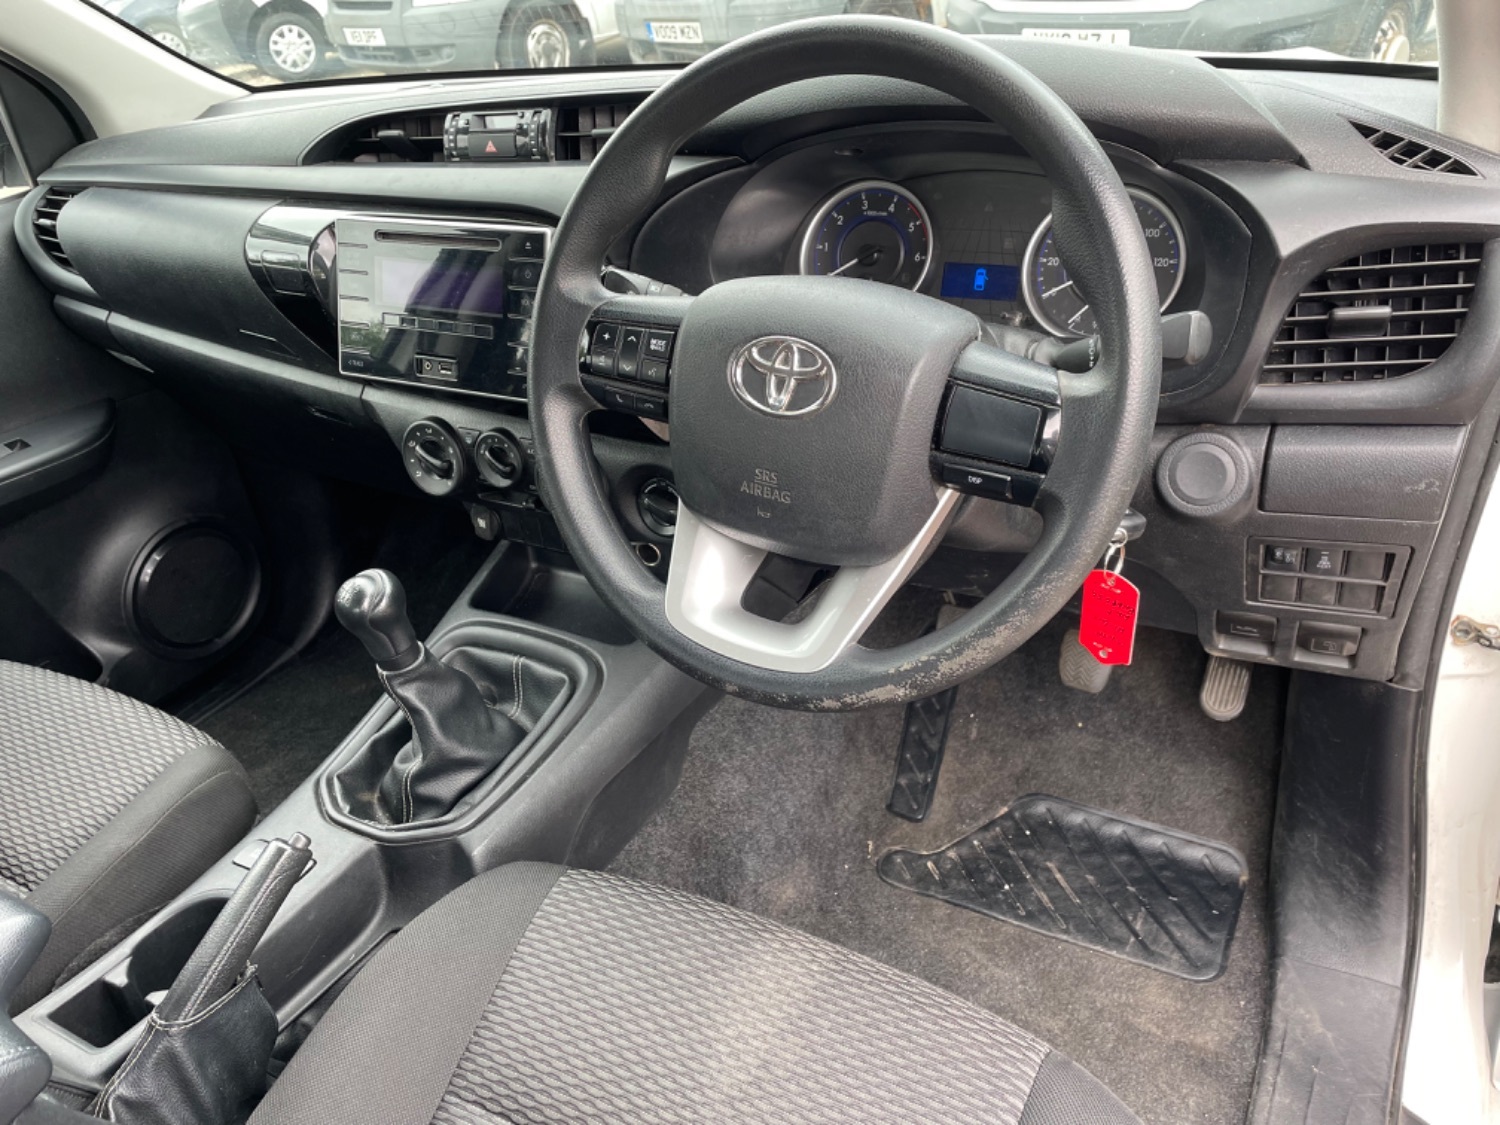 Used TOYOTA HILUX in Oxford, Oxfordshire | Oxford Van Centre Limited